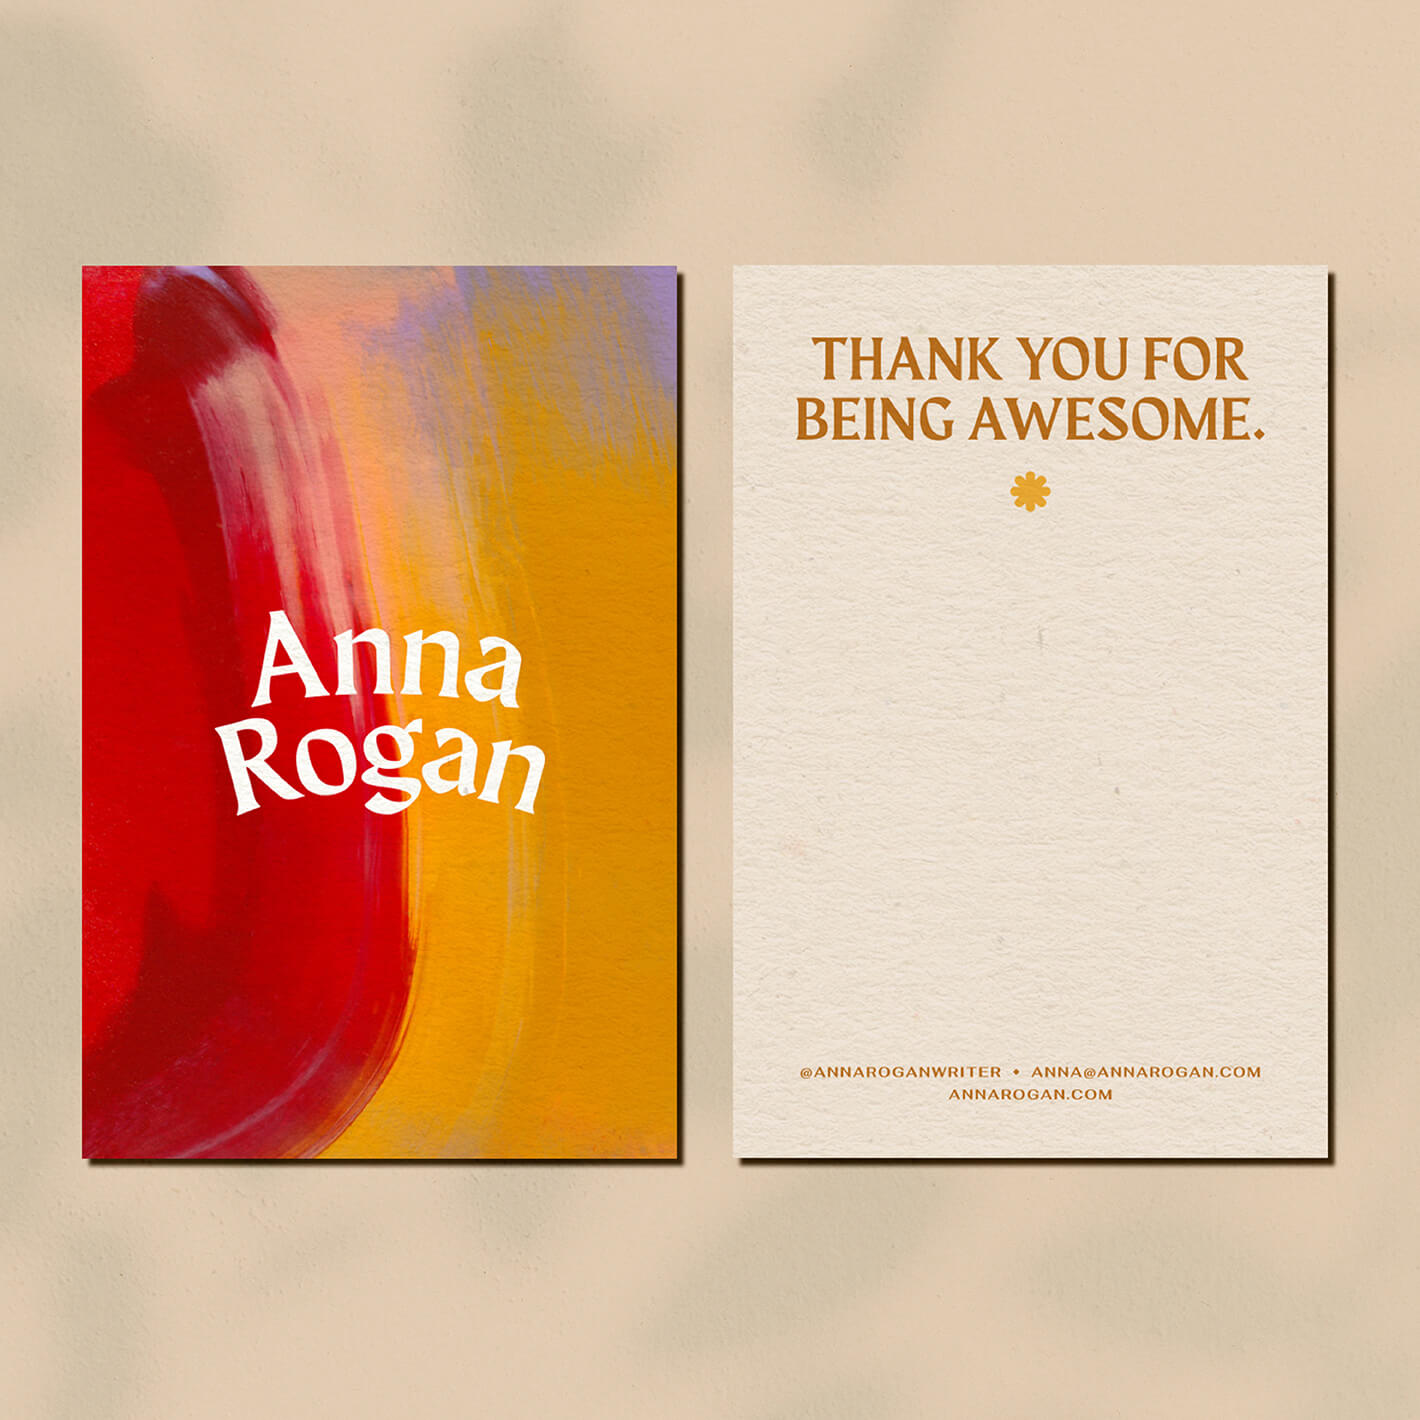 Brand design portfolio image of Anna Rogan’s thank you cards. The front image features the brand logo on a red, yellow and purple painted background while the back features room for a message and the phrase ‘ that you for being awesome’.